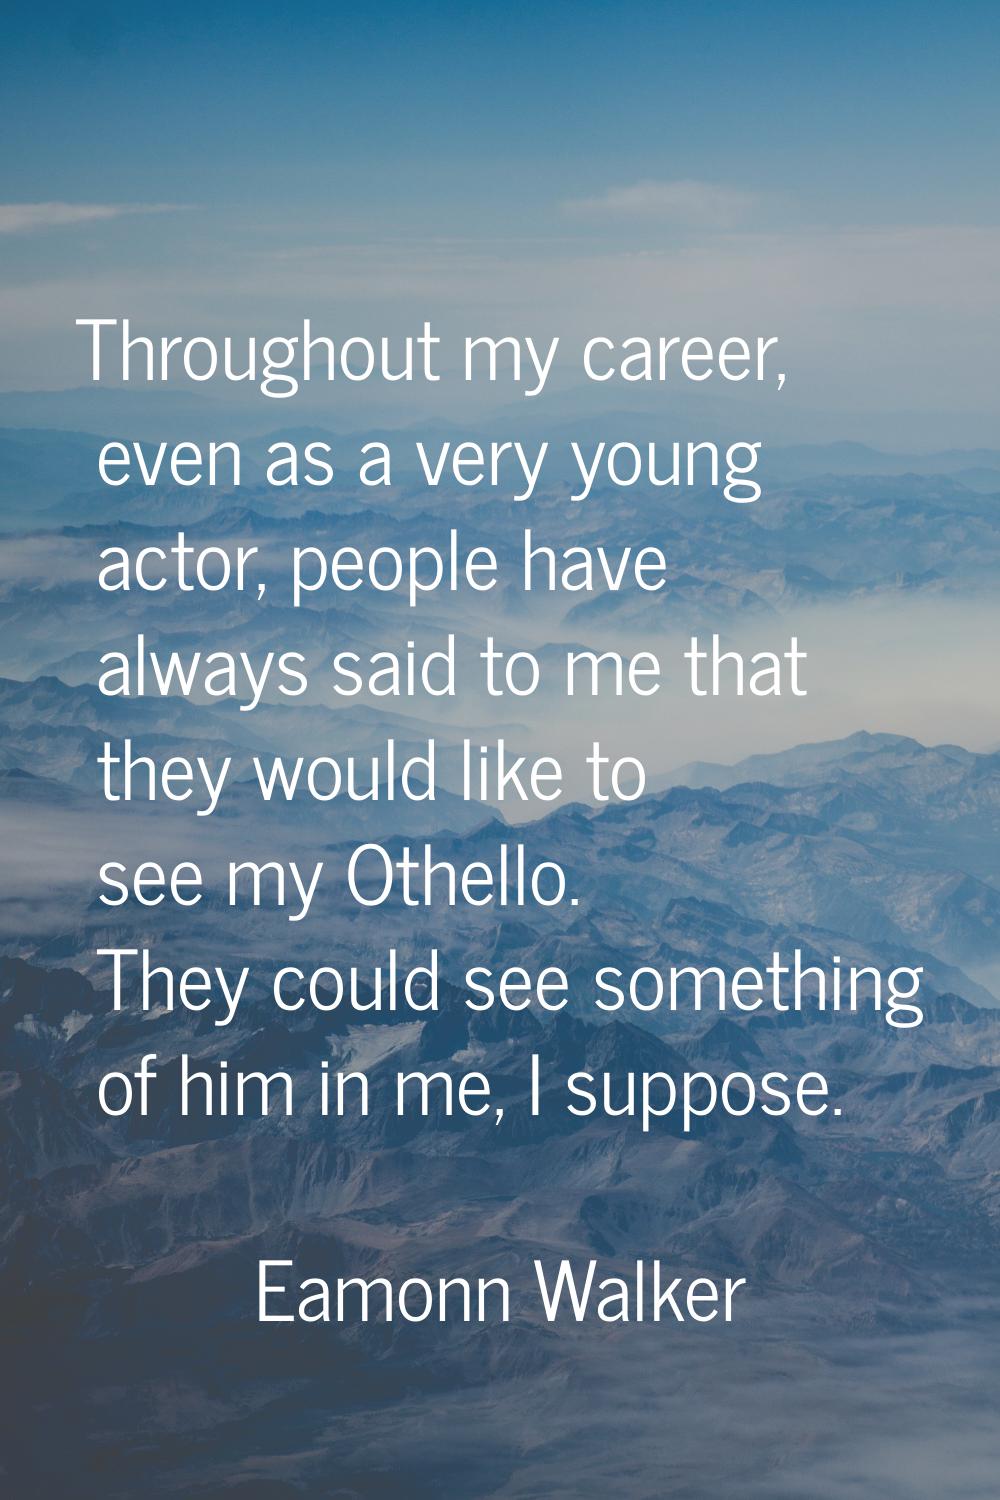 Throughout my career, even as a very young actor, people have always said to me that they would lik